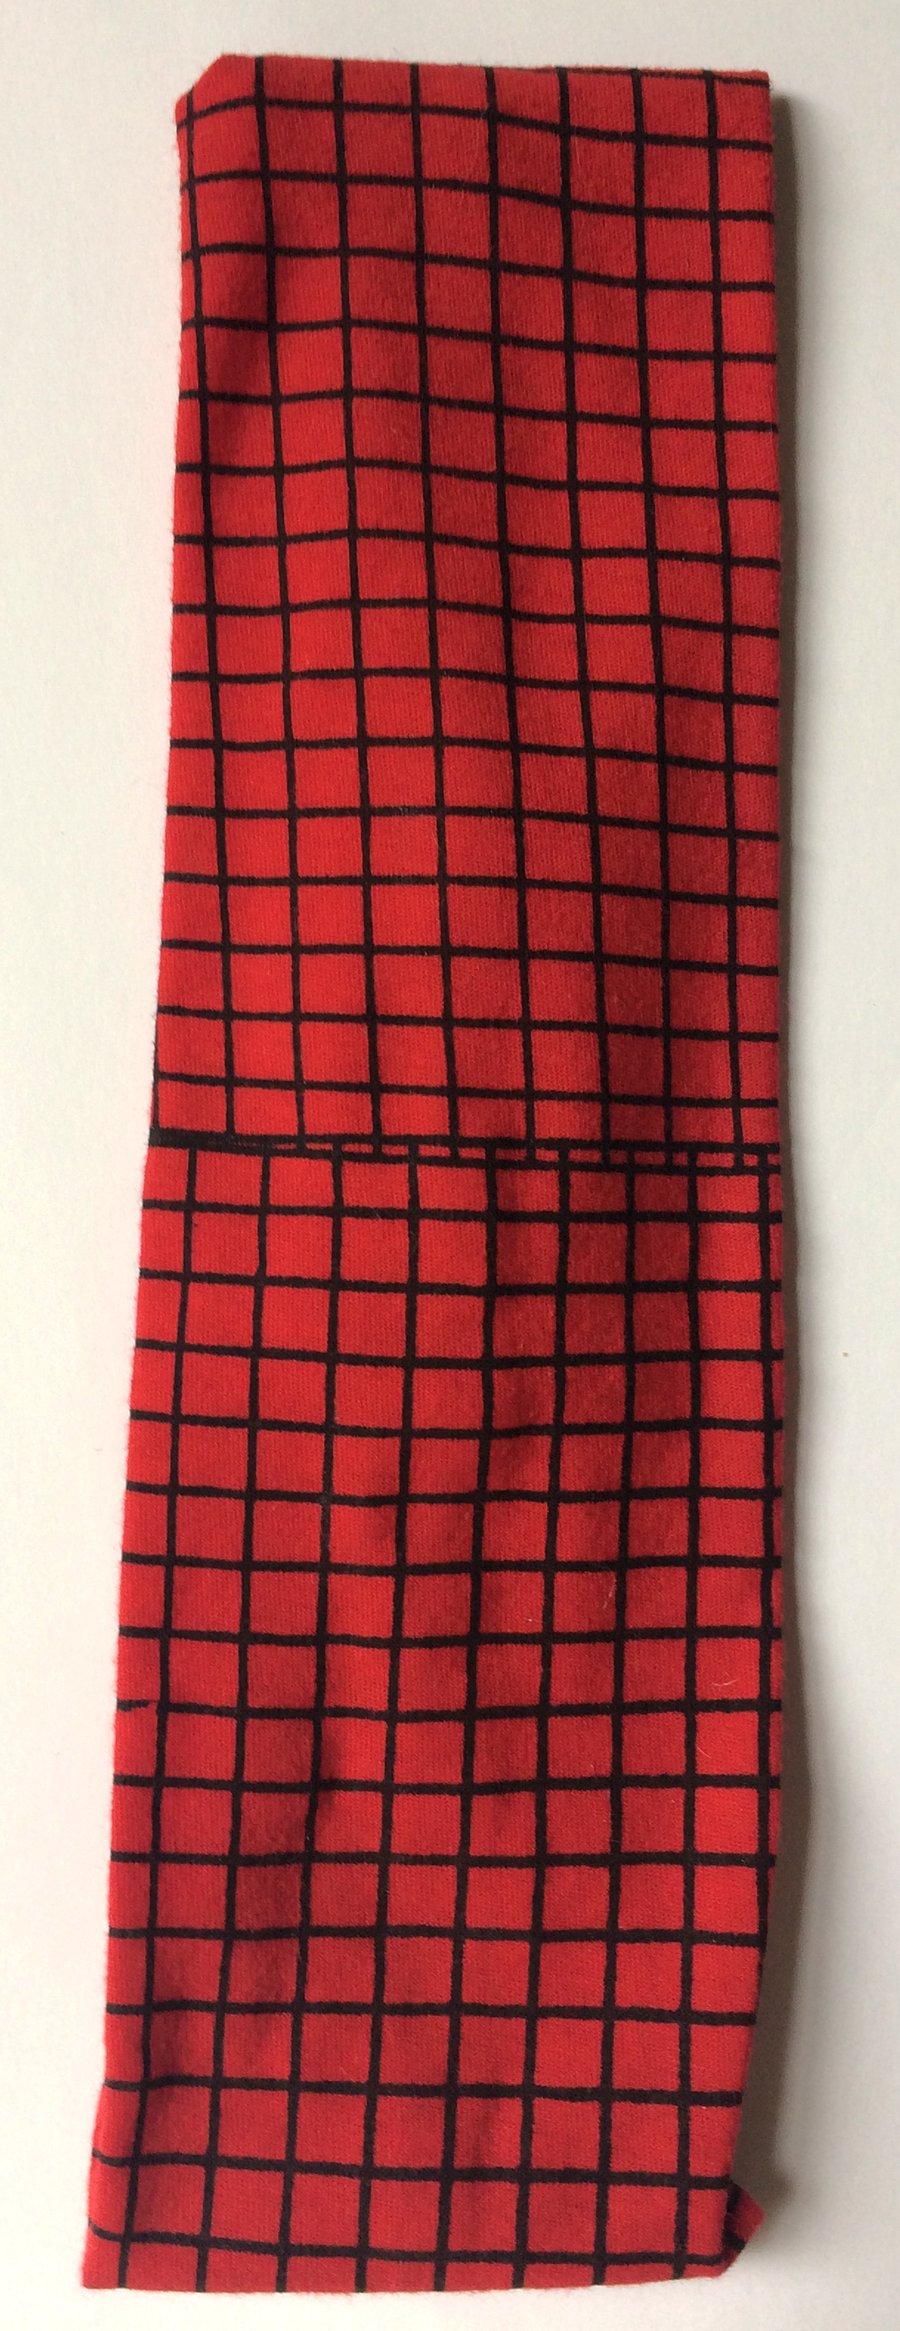 Squares red and black headband